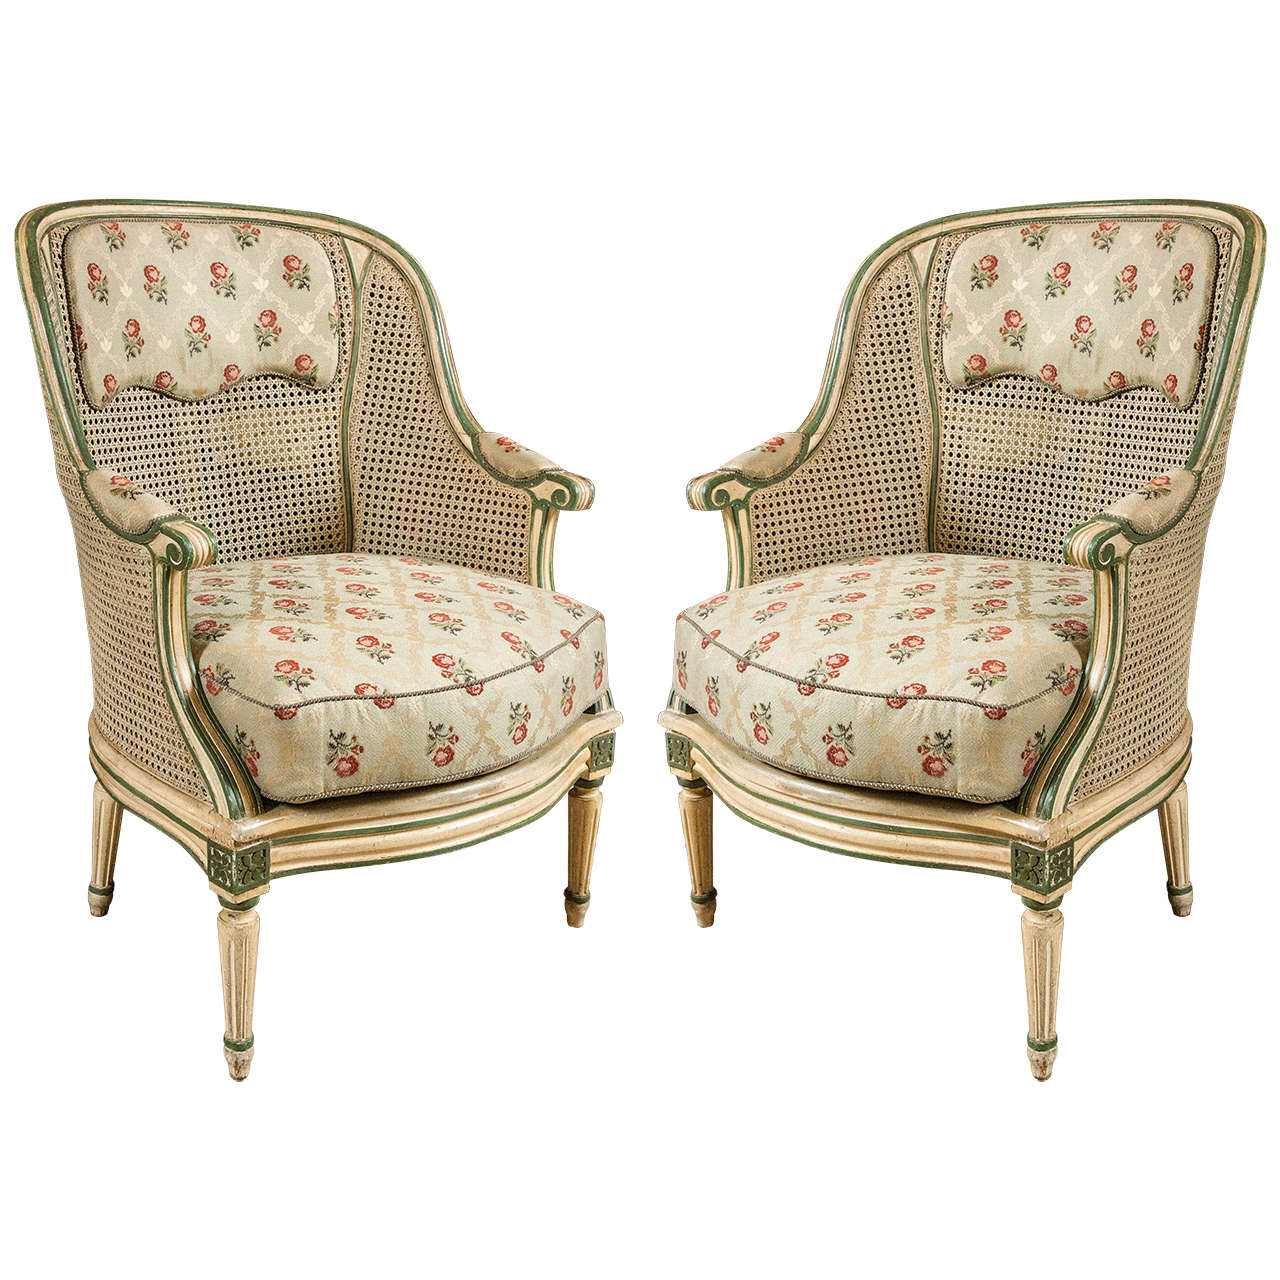 Pair of Bergere Chairs in the Style of Louis XVI